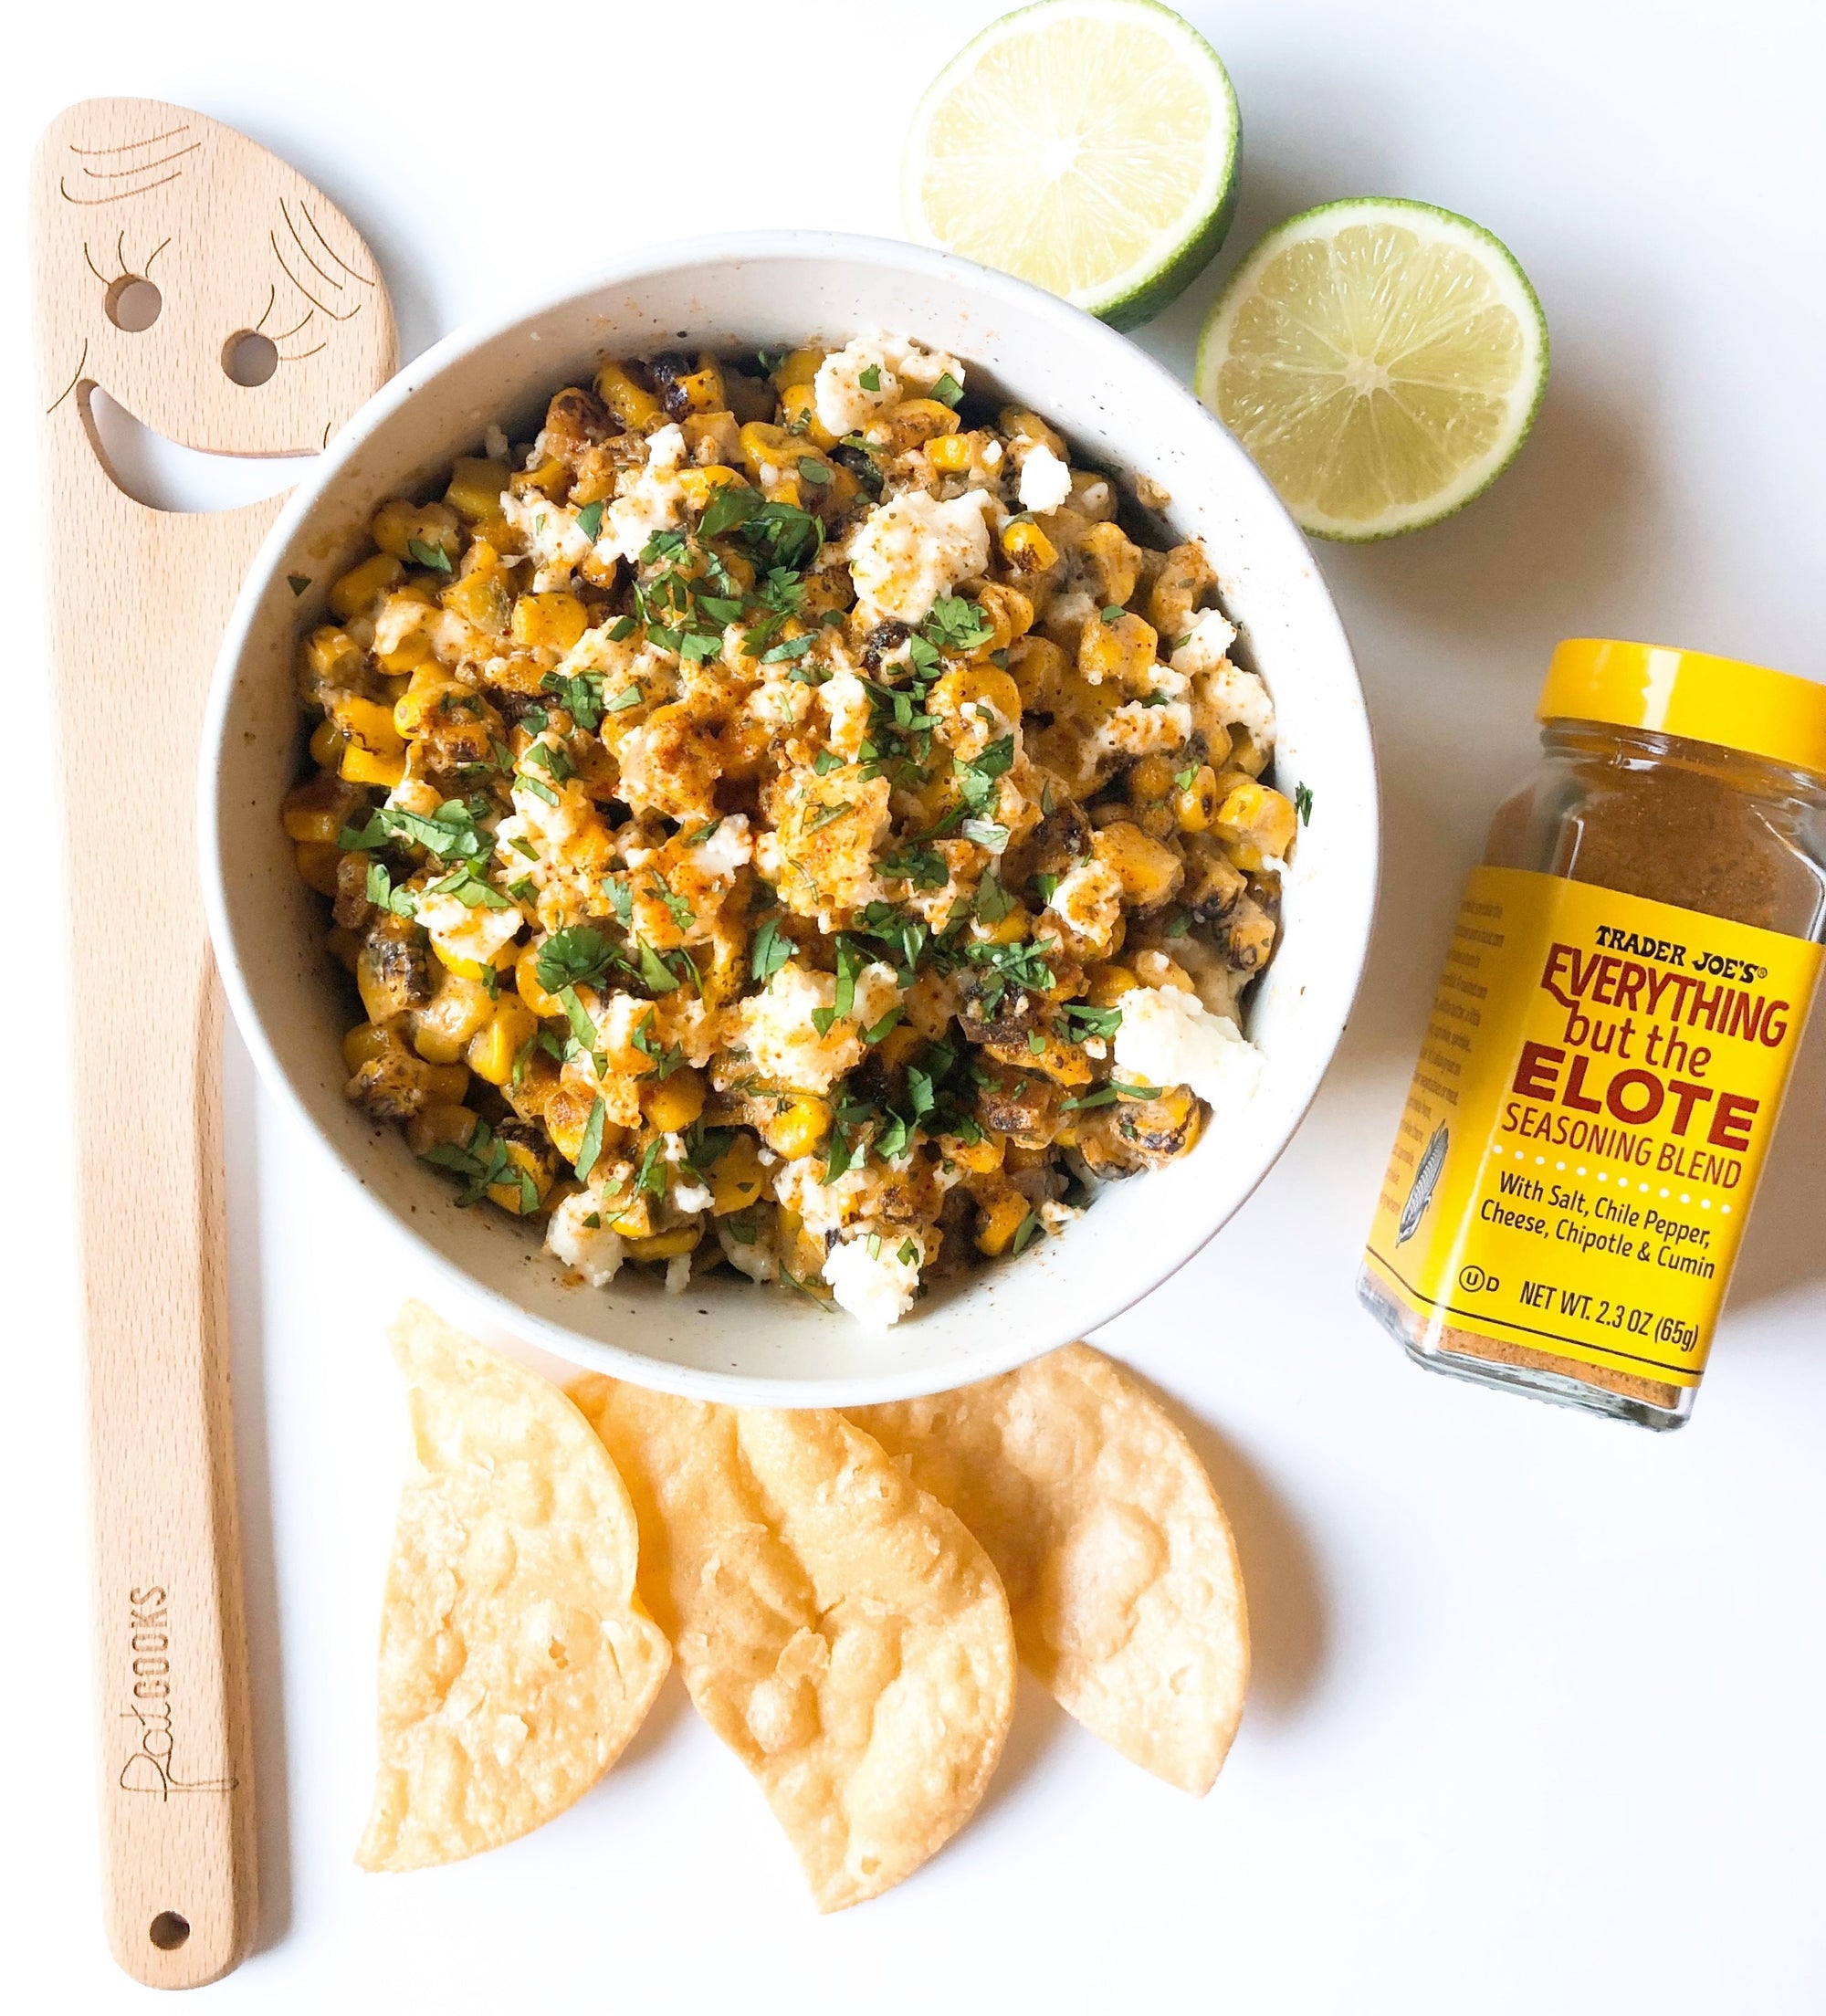 3 Ideas for Trader Joe's Everything But the Elote Seasoning